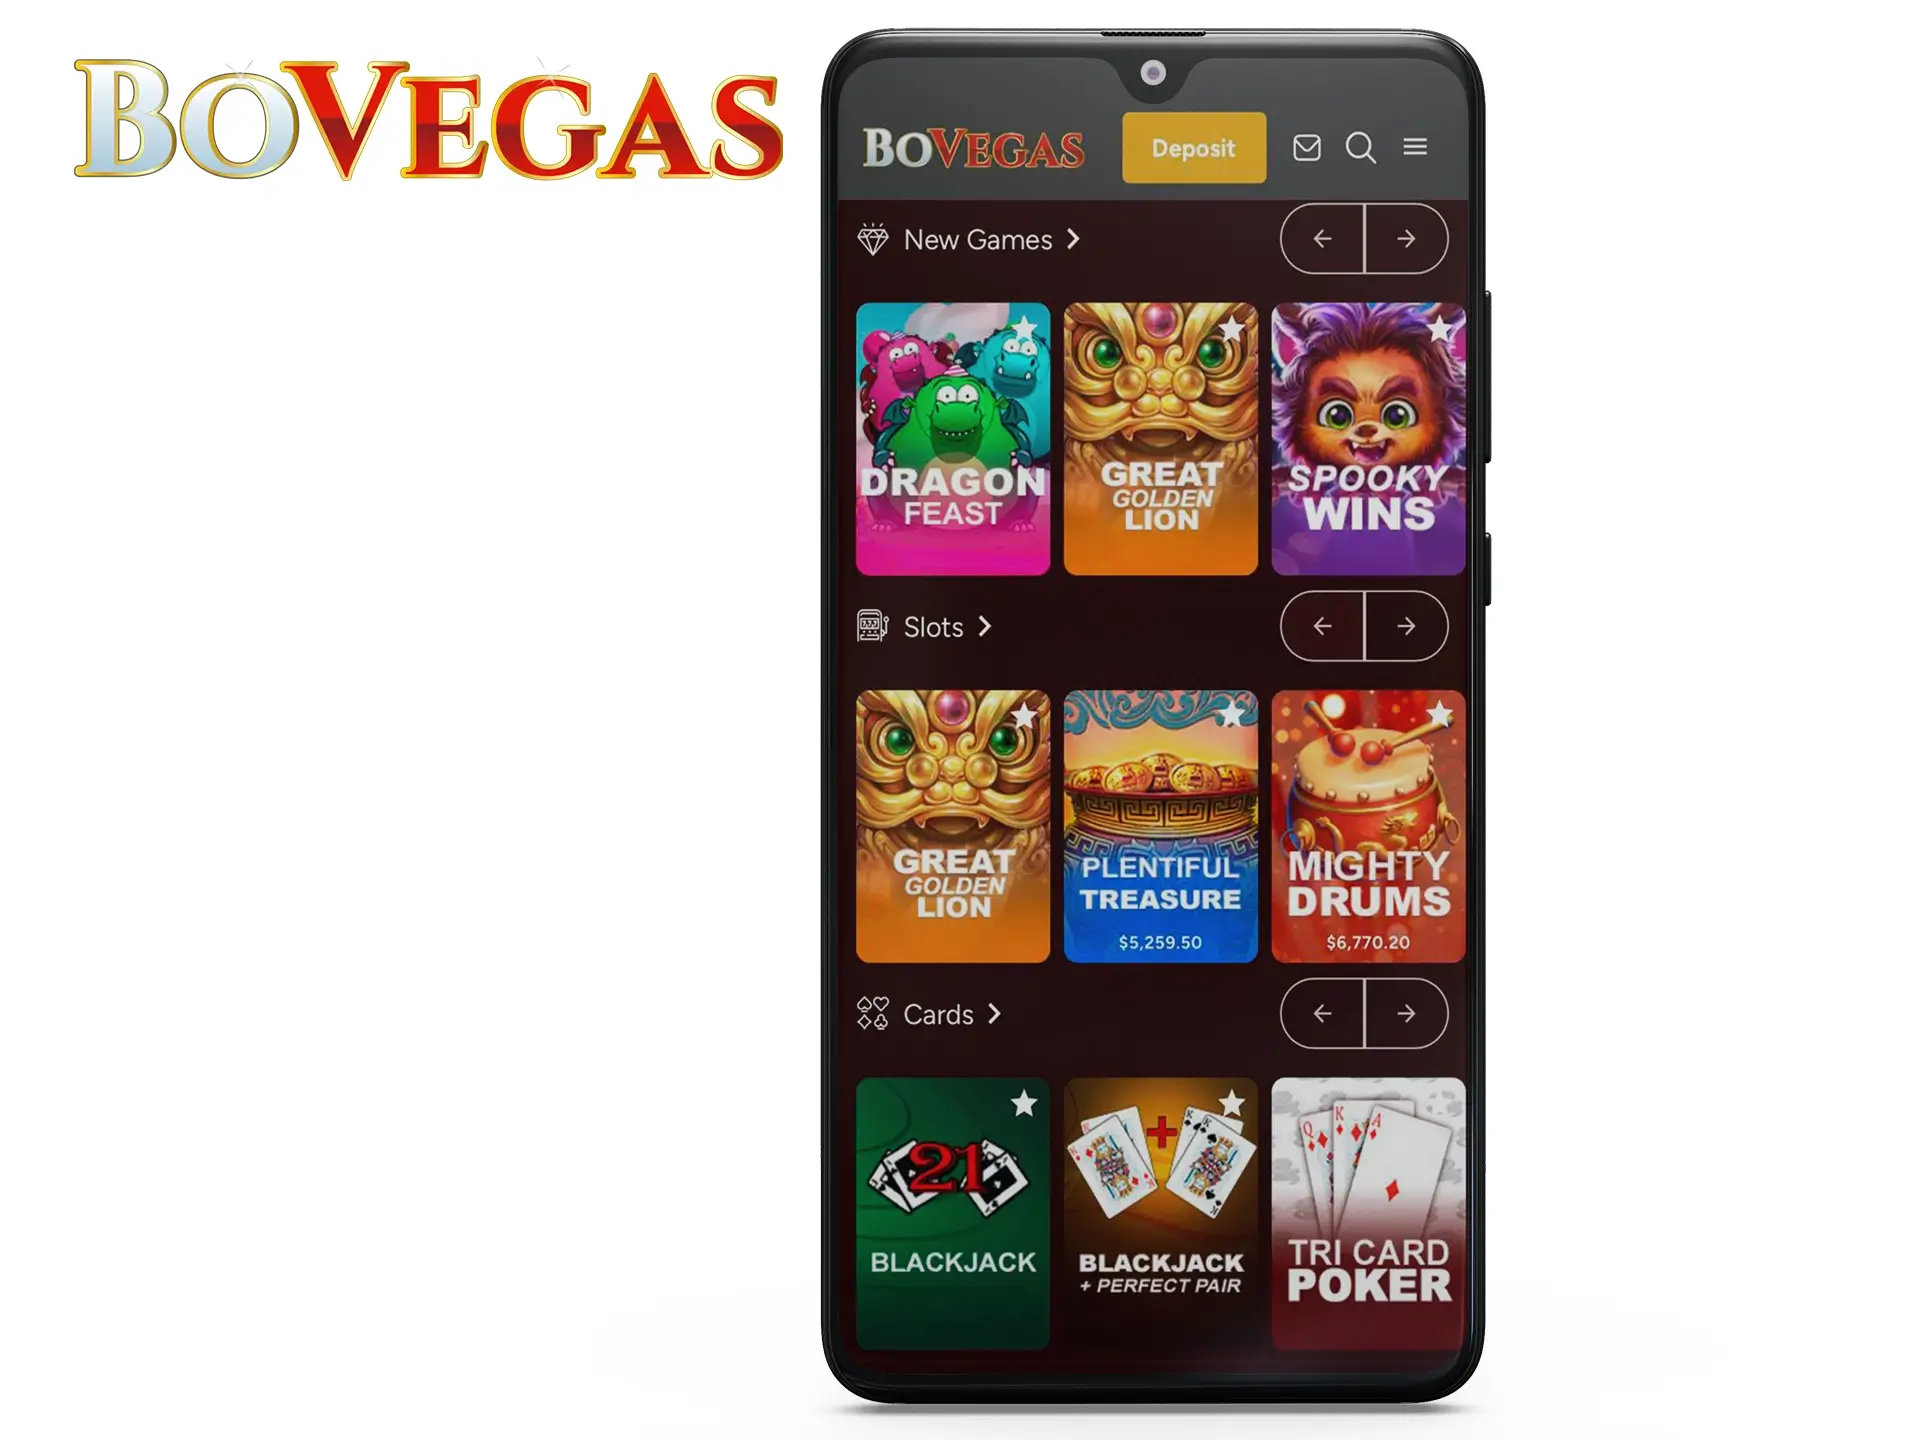 Place bets on Android devices through the mobile version of the site.